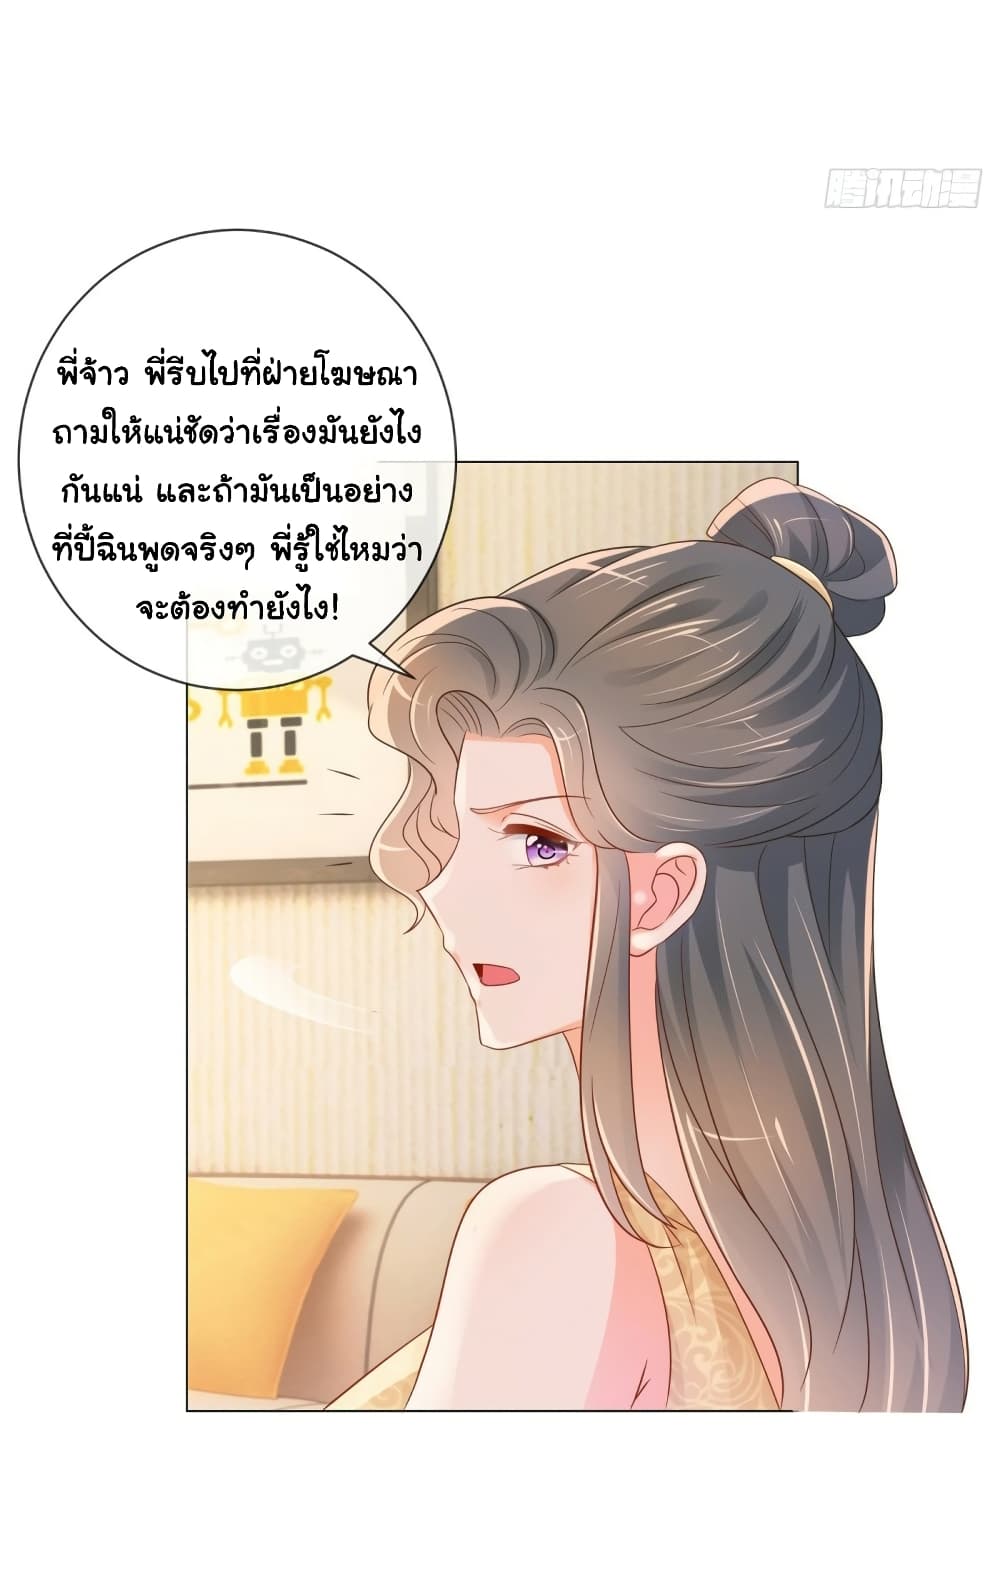 The Lovely Wife And Strange Marriage à¹à¸œà¸™à¸£à¸±à¸à¸¥à¸§à¸‡à¹ƒà¸ˆ 322 (7)